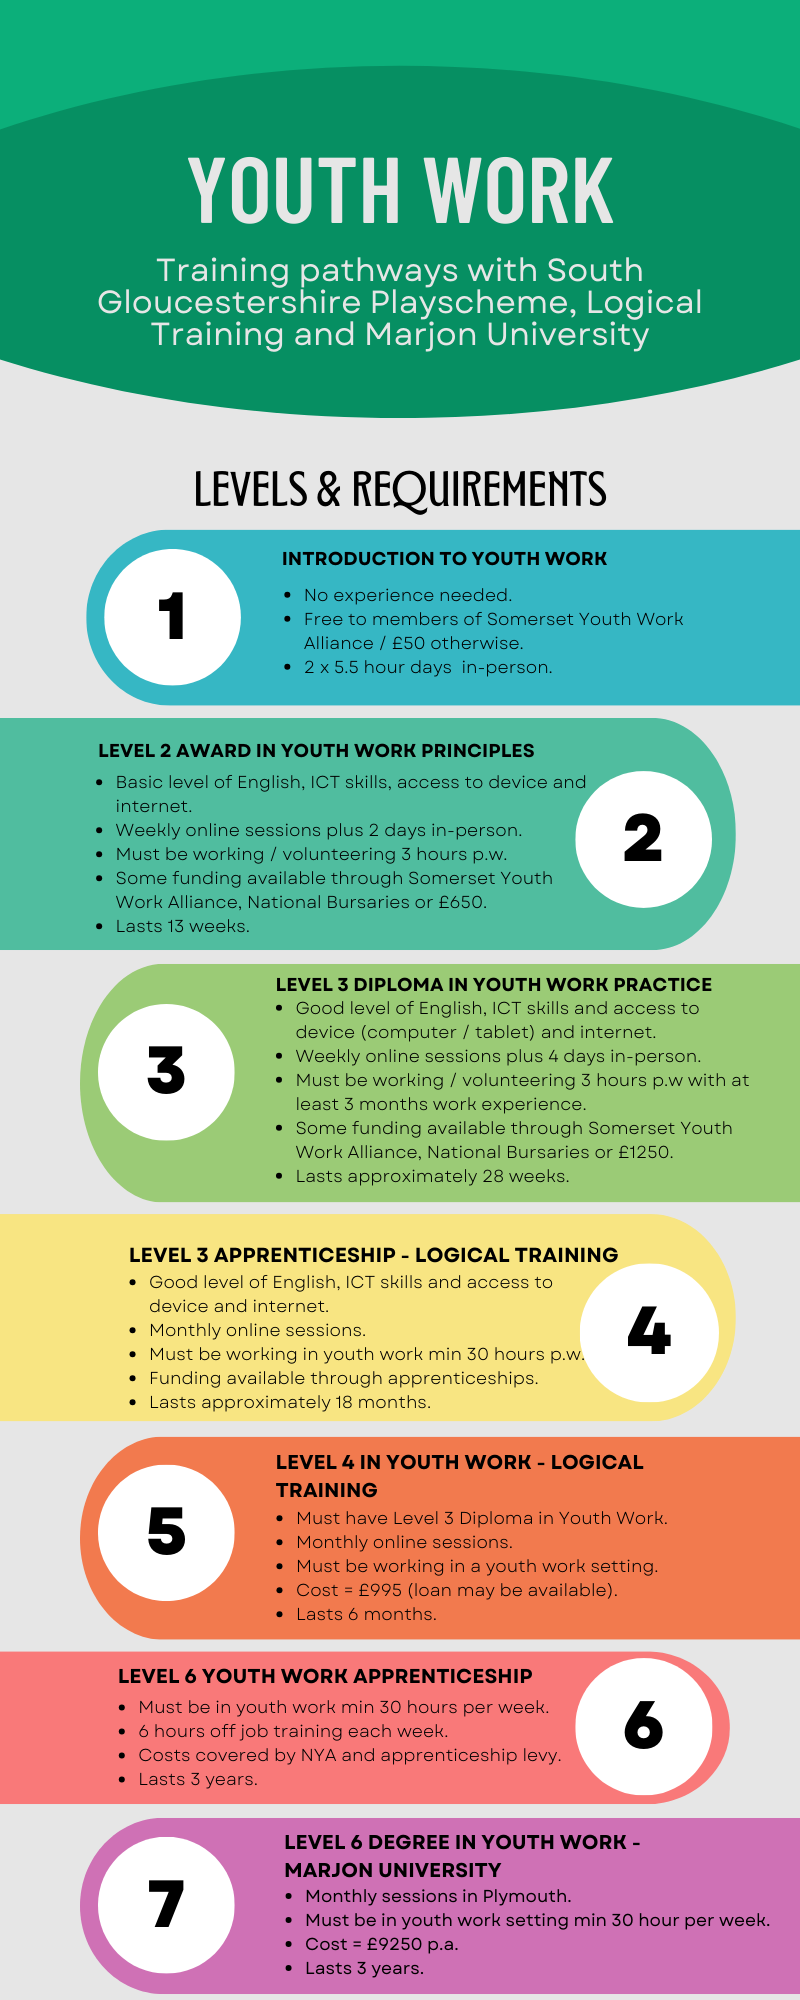 Infographic showing the 7 stages or levels to progress in your career in Youth Work.